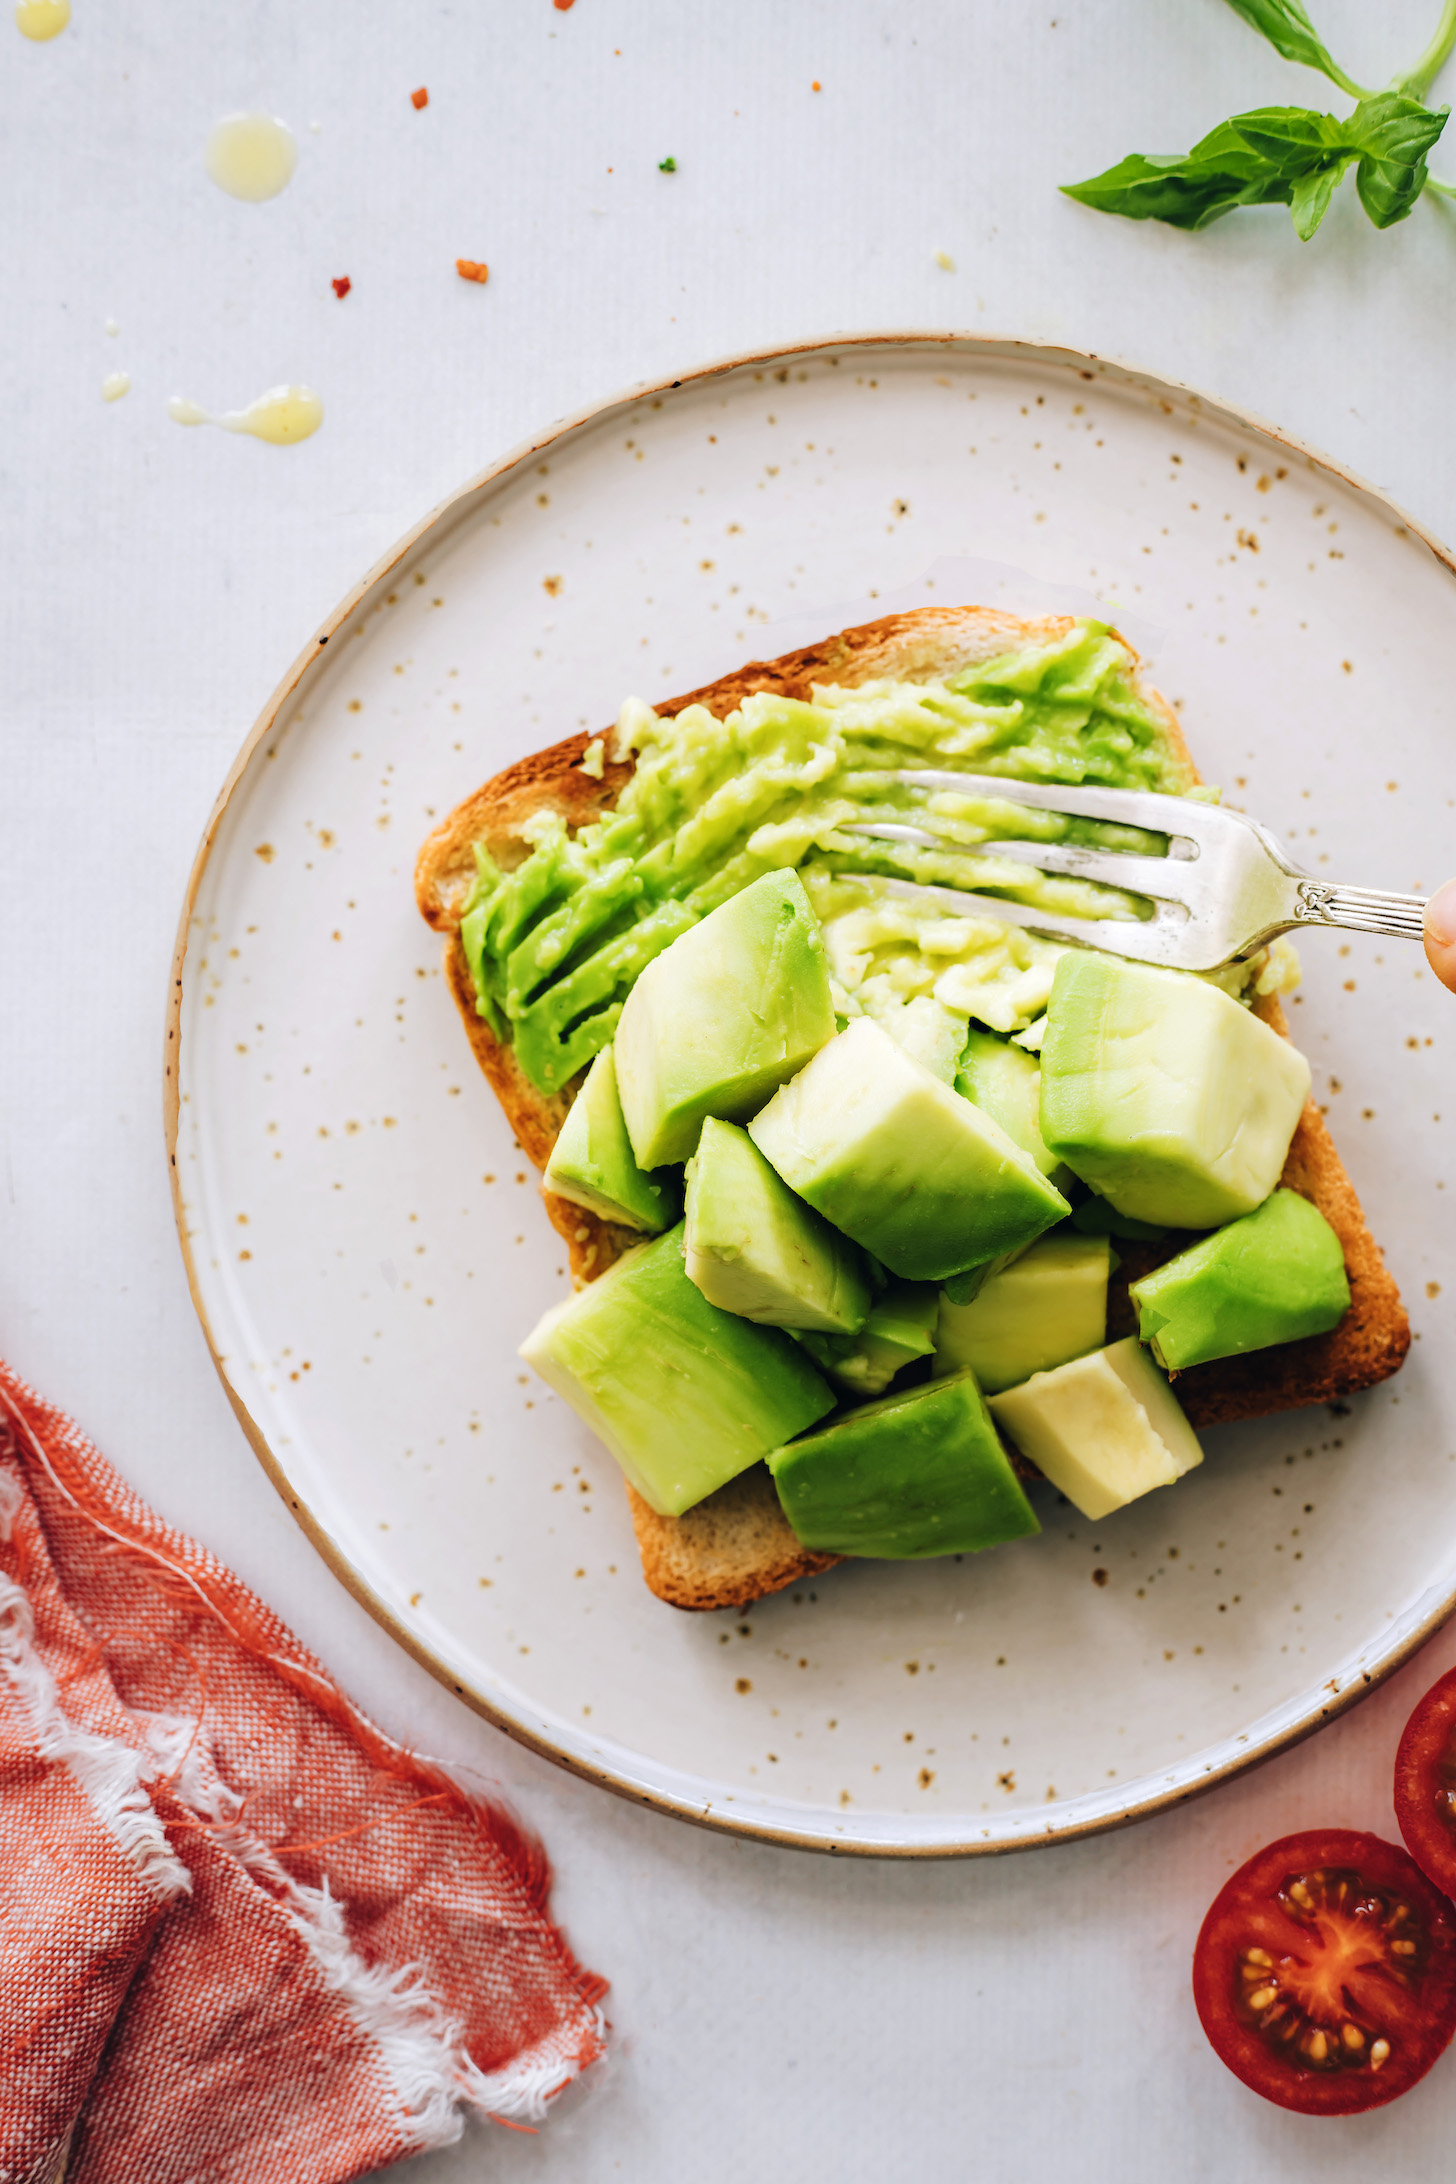 Using a fork to smash chunks of avocado on a slice of toast